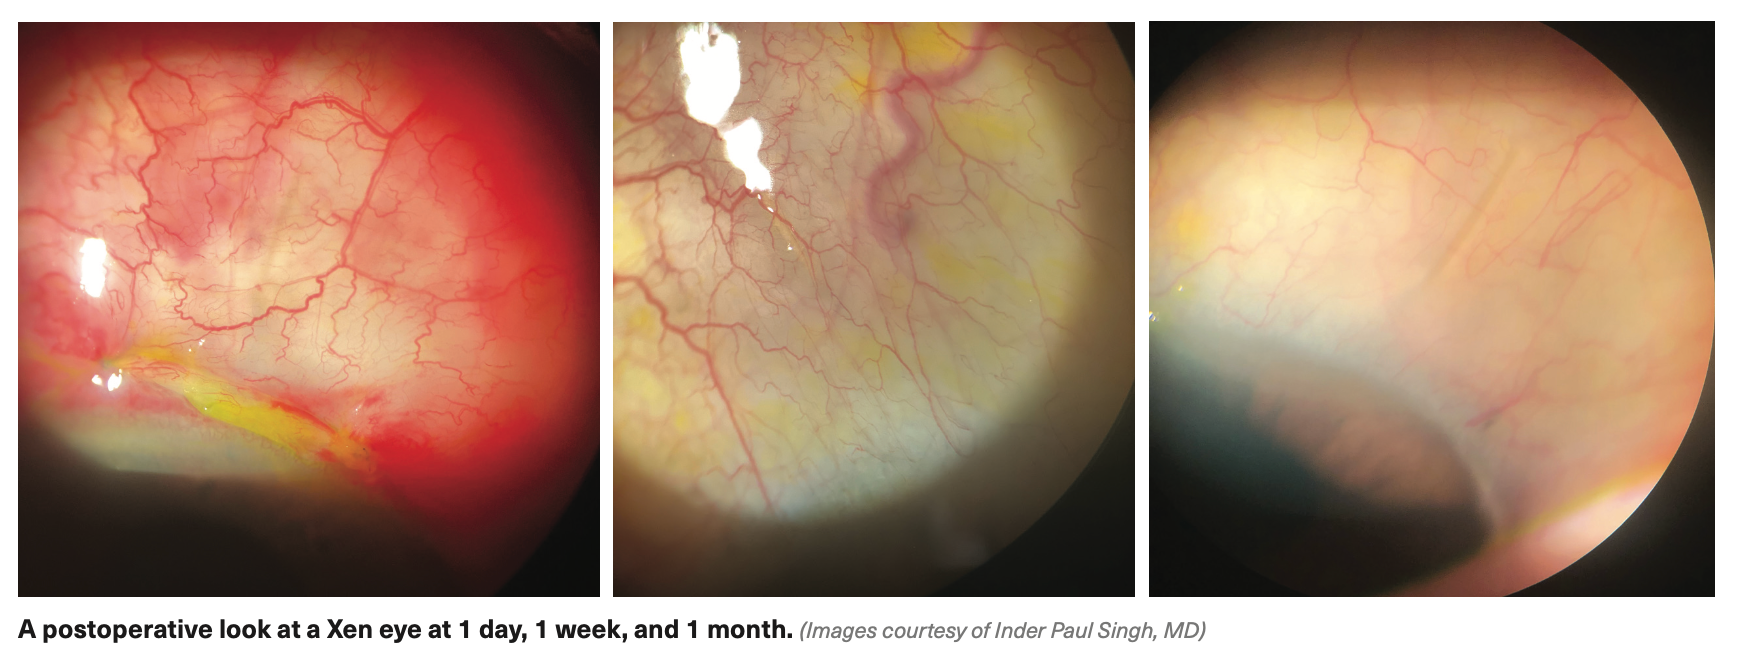 A postoperative look at a Xen eye at 1 day, 1 week, and 1 month. (Images courtesy of Inder Paul Singh, MD)